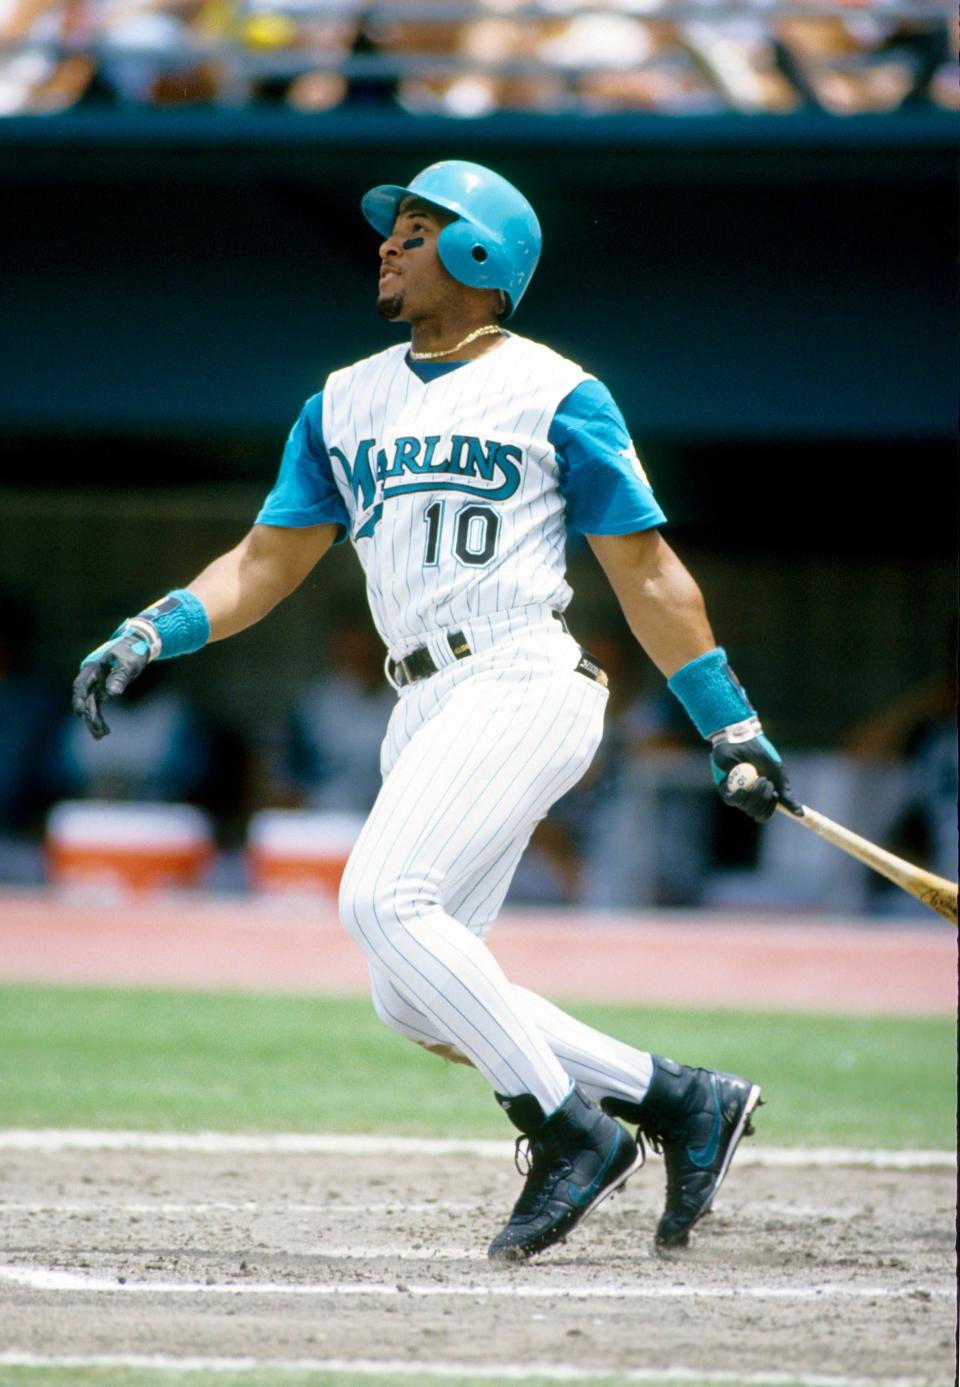 1994, Miami, FL, USA; FILE PHOTO; Florida Marlins right fielder Gary Sheffield in action at the plate at Dolphin Stadium during the 1994 season. Mandatory Credit: RVR Photos-USA TODAY Sports